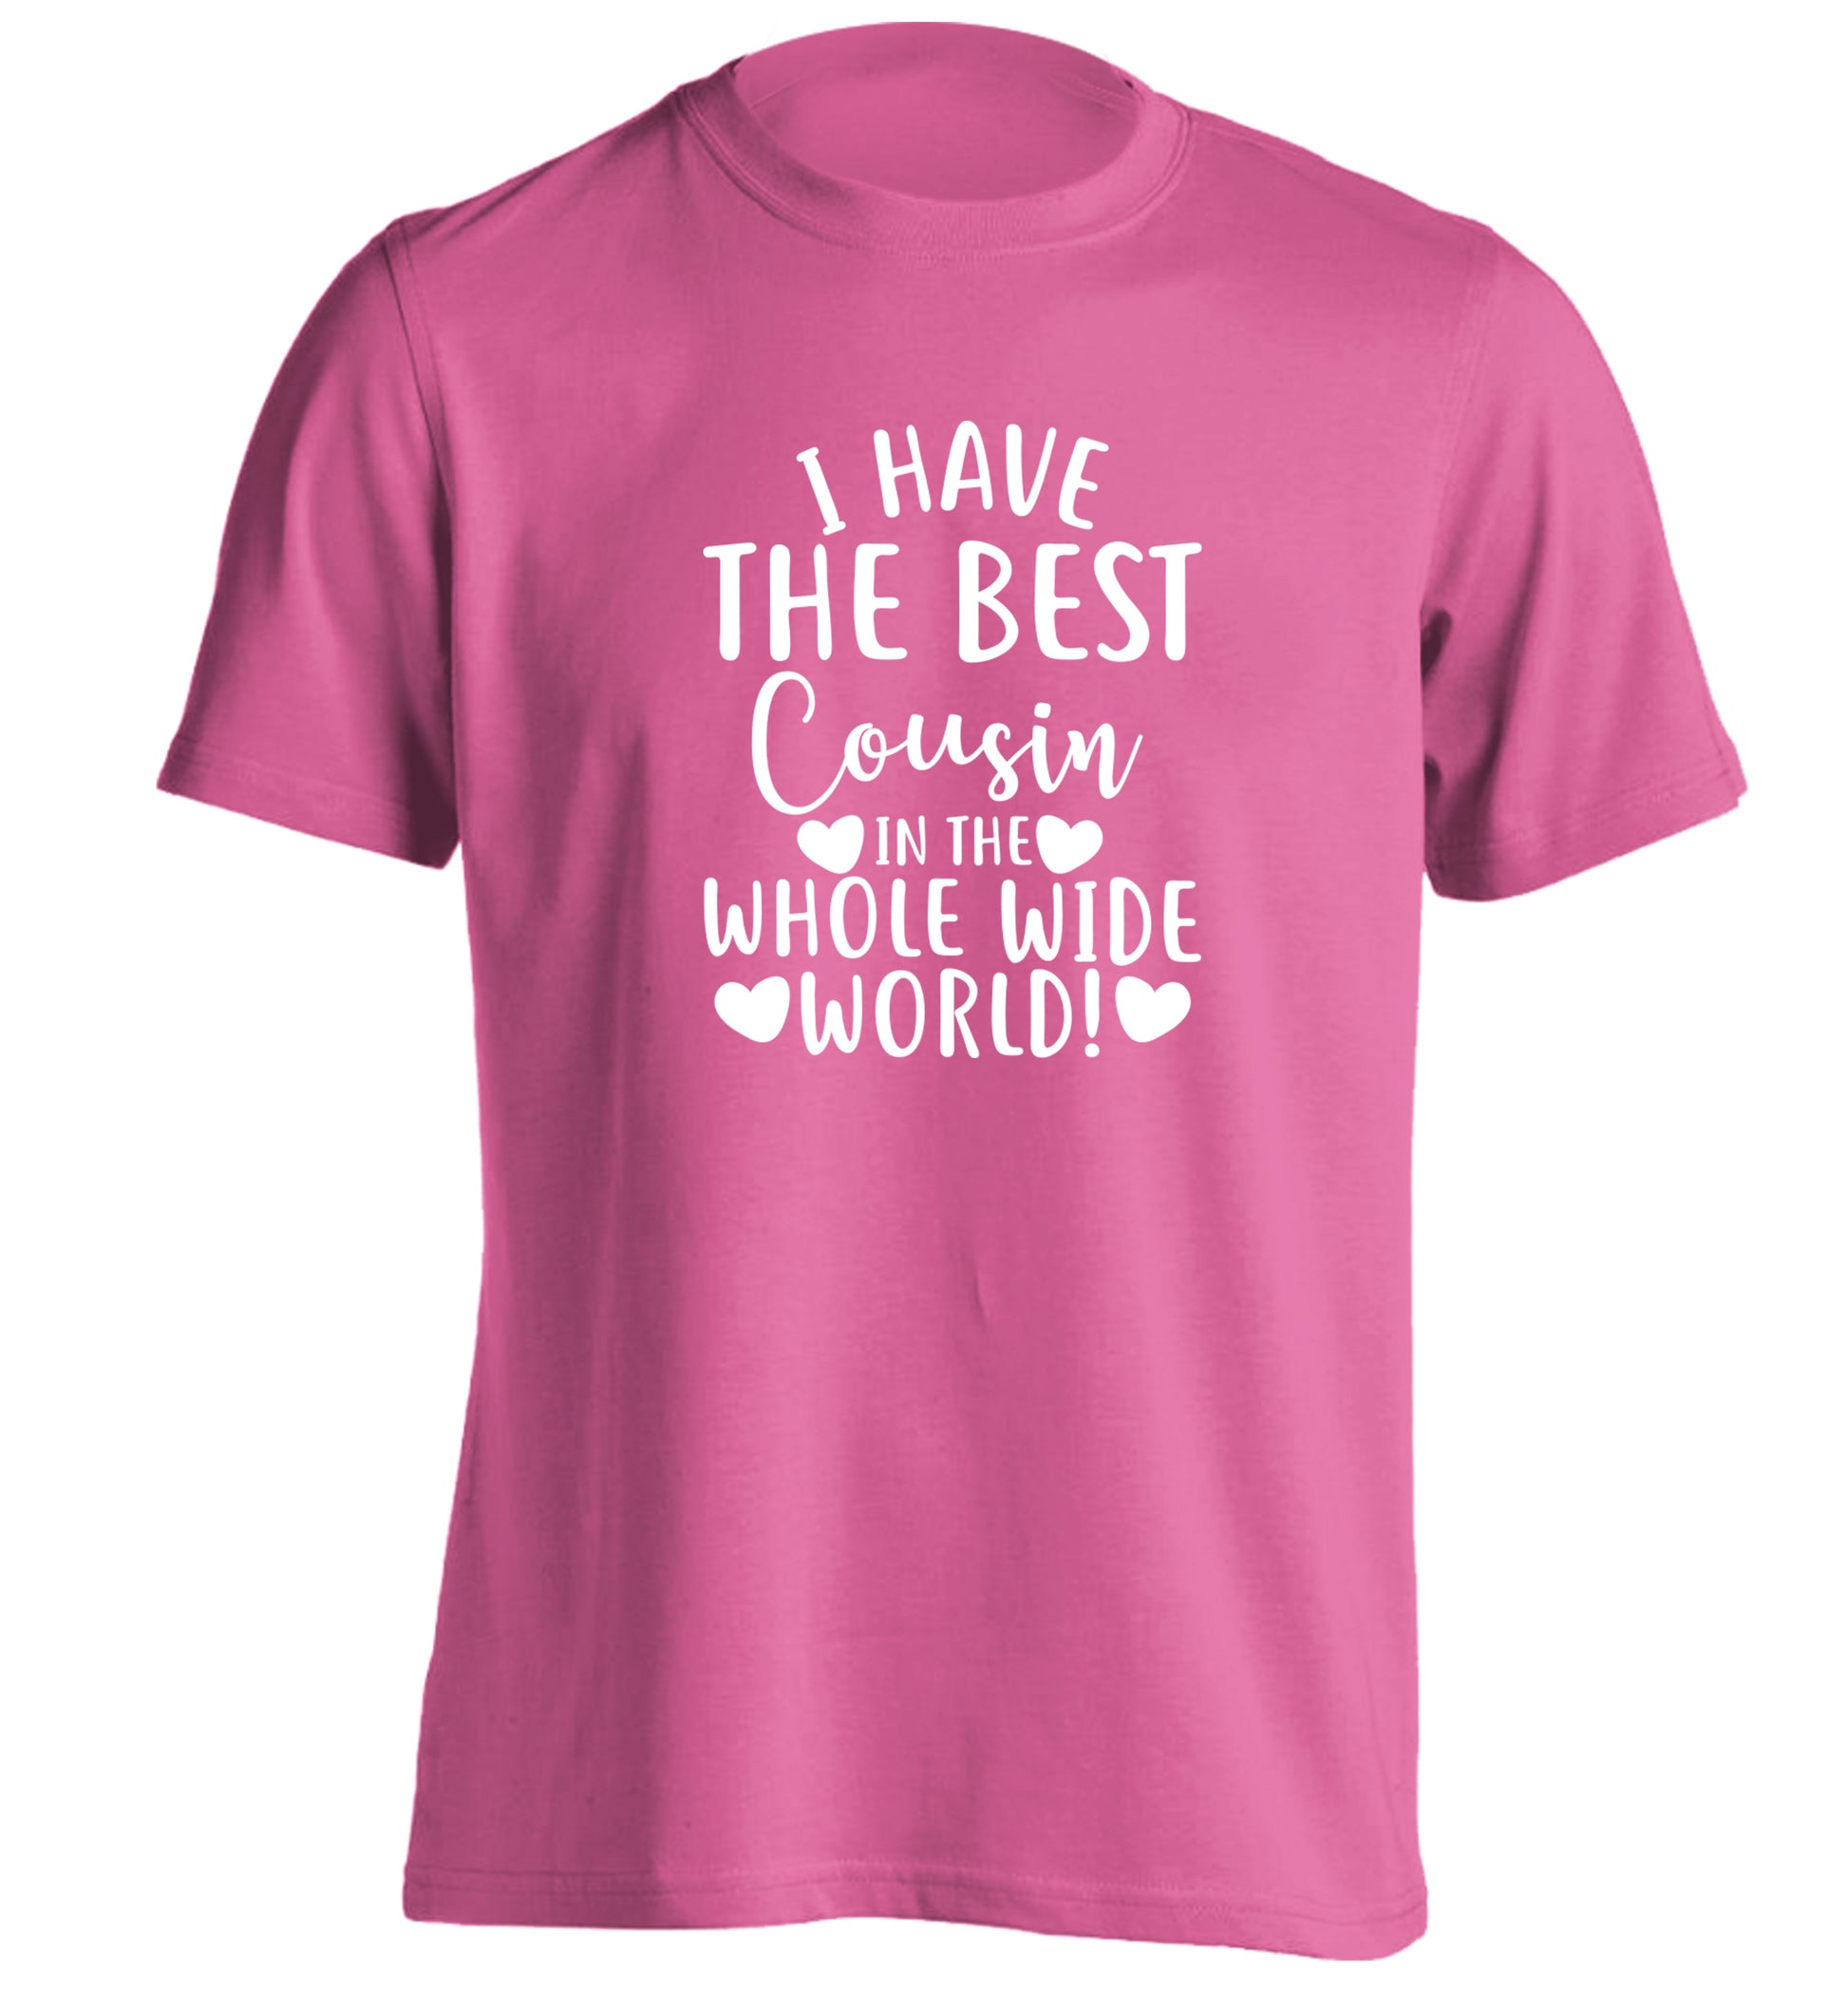 I have the best cousin in the whole wide world! adults unisex pink Tshirt 2XL